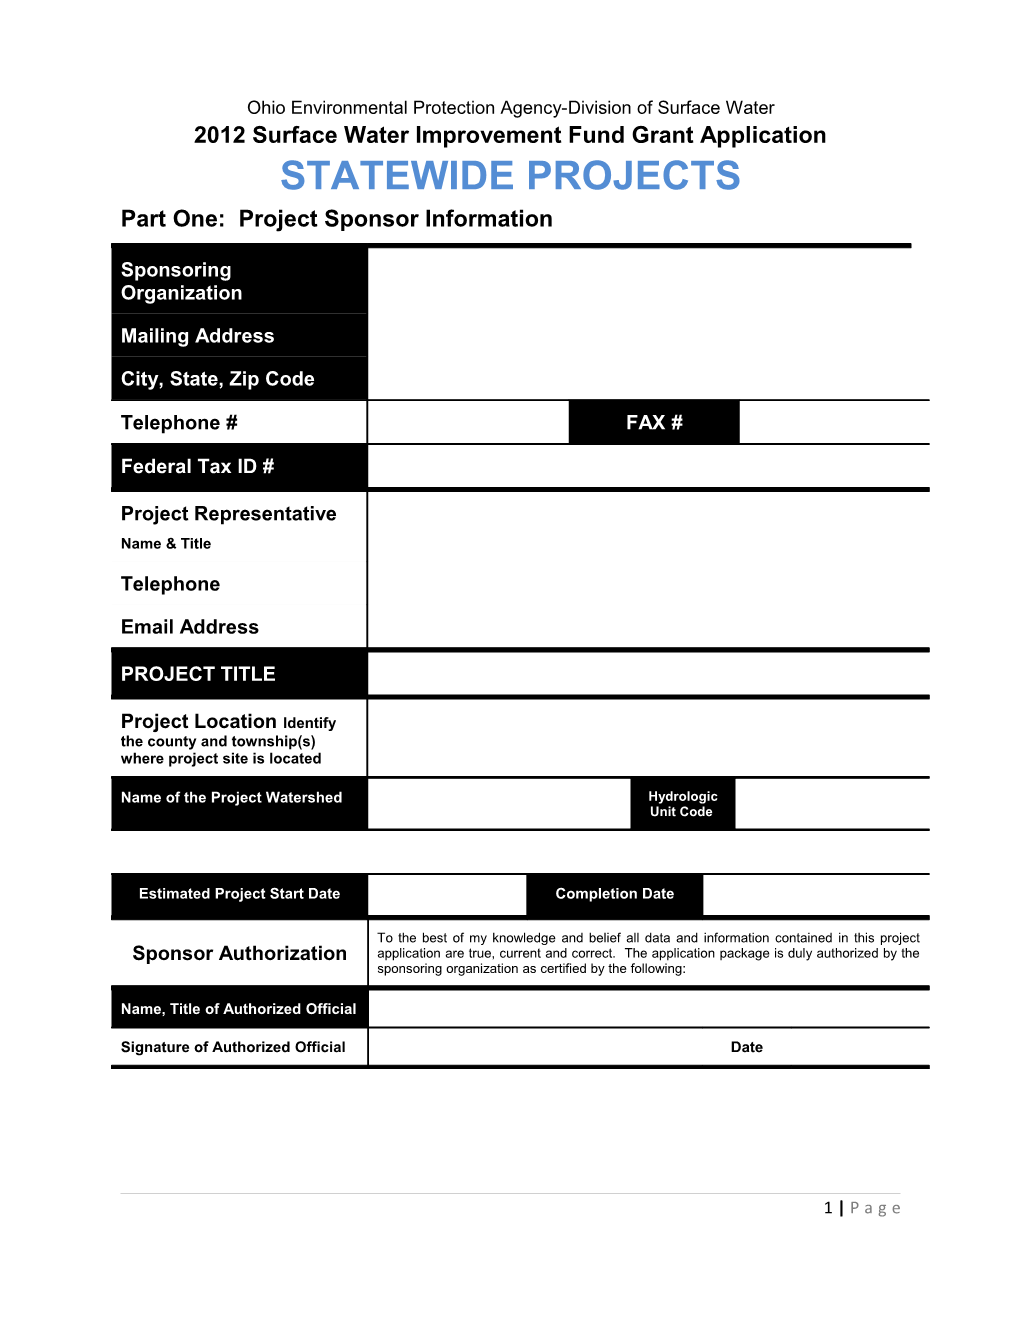 2012 Surface Water Improvement Fund Grant Application